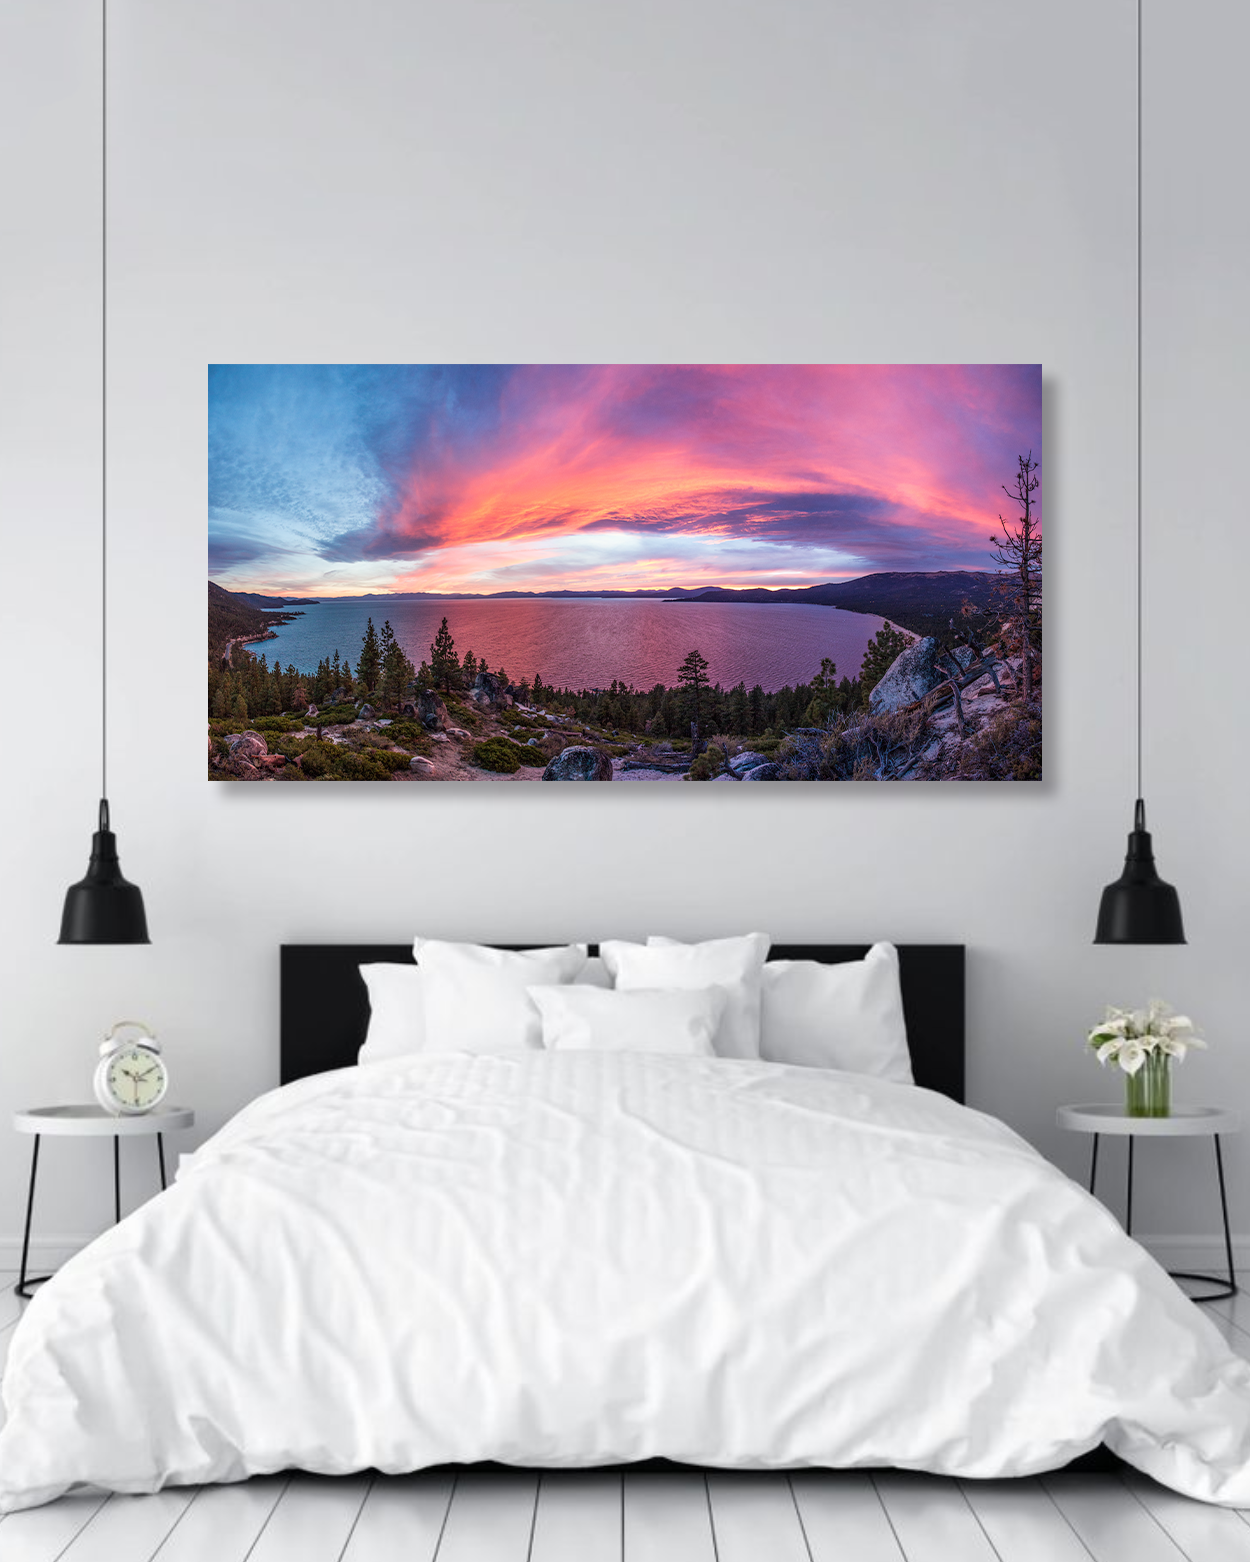 A large photo print of a vibrant pink sunset over Lake Tahoe hangs on the wall of a bedroom.